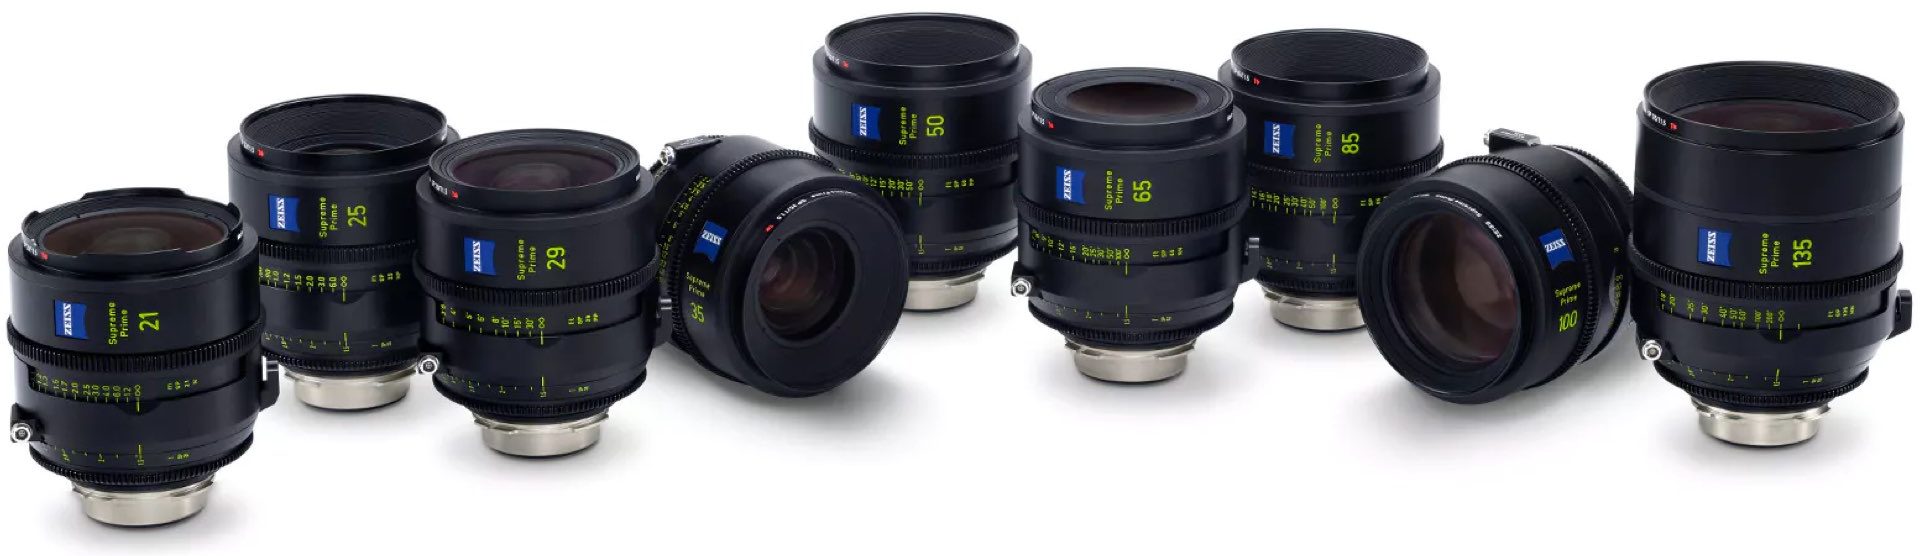 The ZEISS Supreme Primes